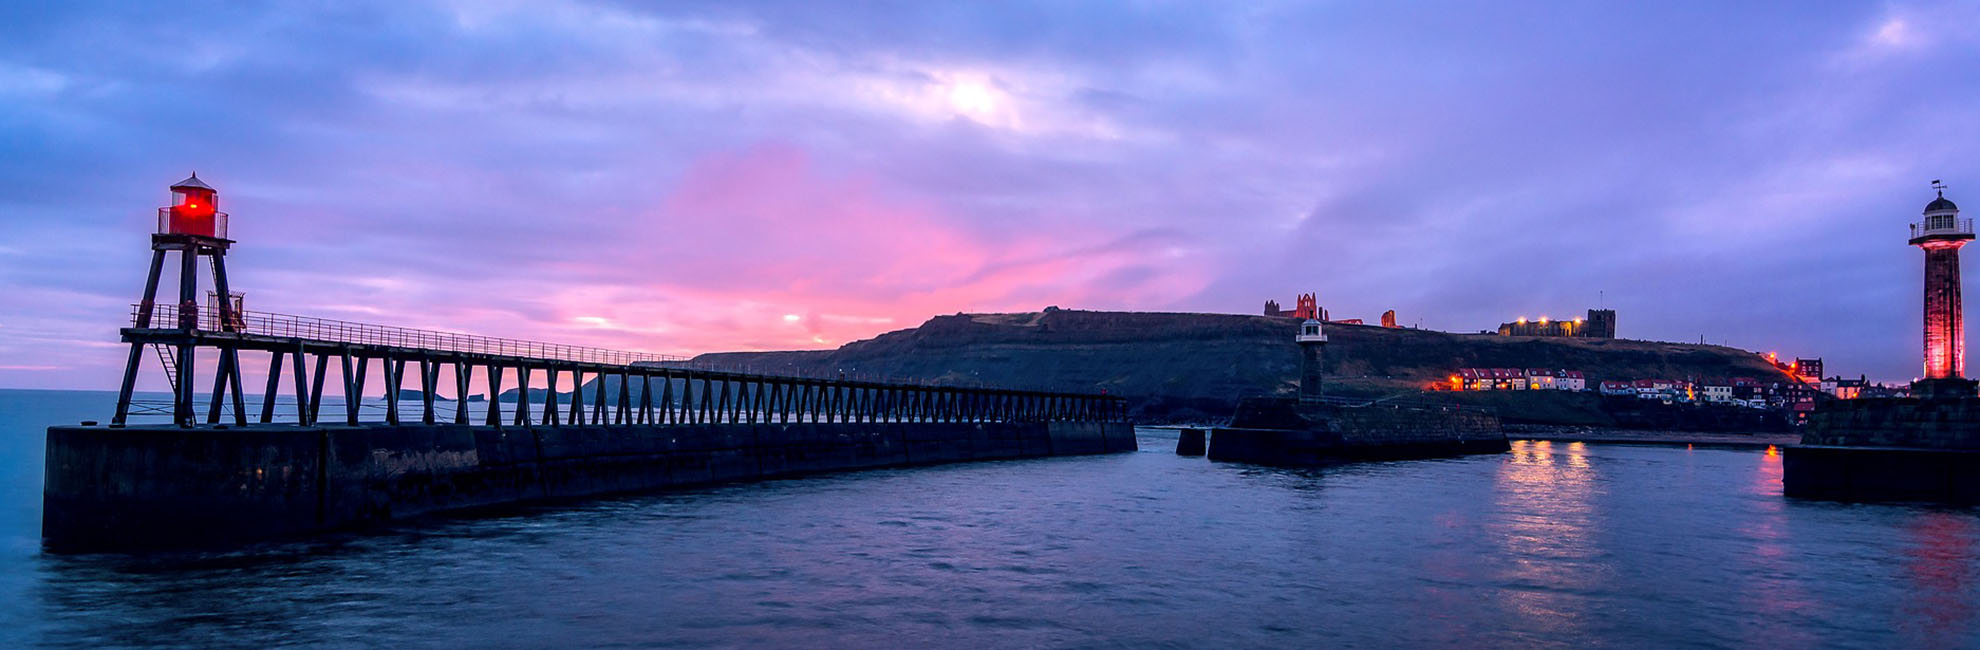 Piers across the sea at dusk in Yorkshire